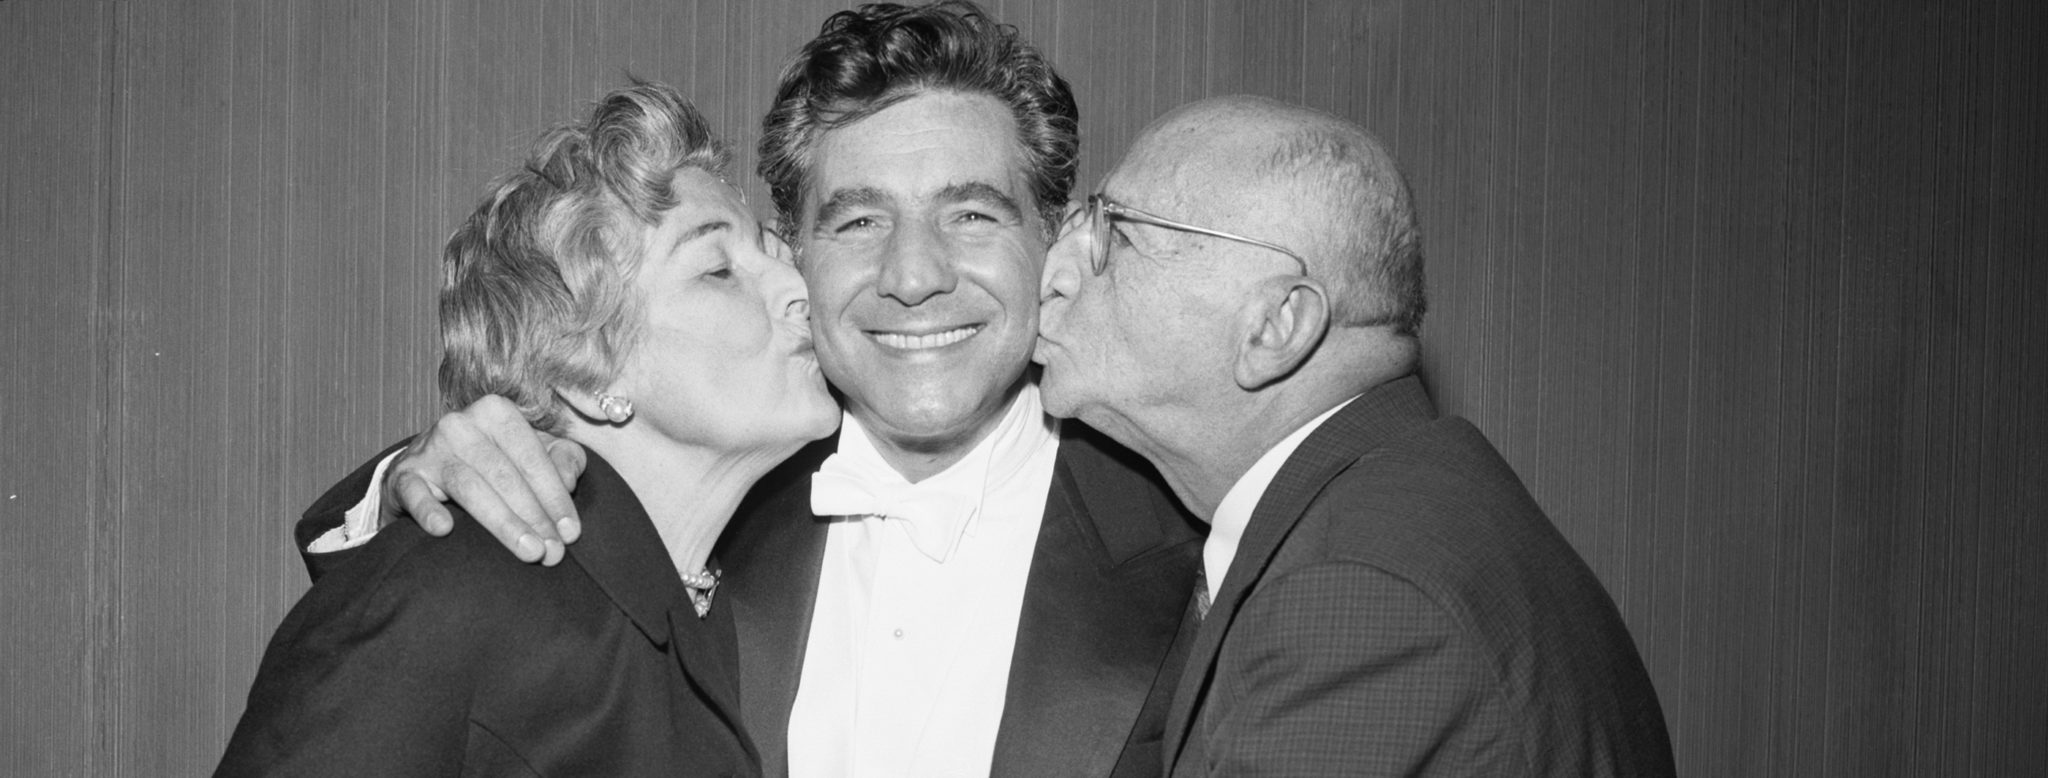 Leonard Bernstein receives kisses from his parents. (Original Caption) 1/2/1958-New York, NY: Mr. and Mrs. Samuel J. Bernstein proudly embrace their famed son, Leonard, after his first concert as conductor of the N.Y. Philharmonic Orchestra at Carnegie Hall tonight. Conductor Bernstein marked the occasion by performing as soloist in the Shostakovich Concerto No. 2 for piano and orchestra. (Credit: Getty Images / Bettmann)